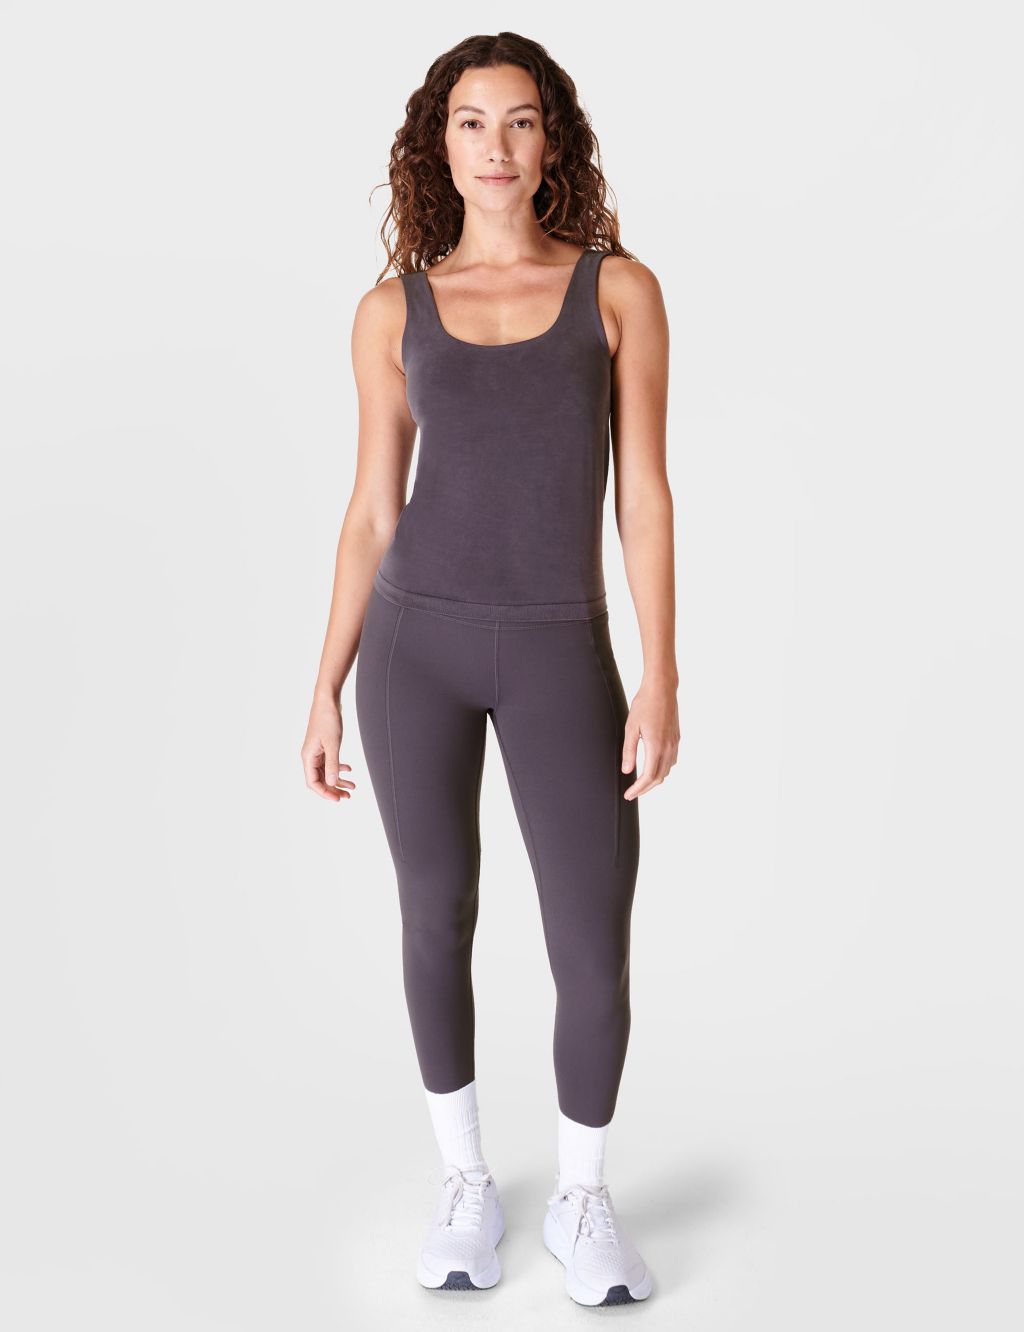 Softly Seamless Scoop Neck Fitted Vest Top | Sweaty Betty | M&S